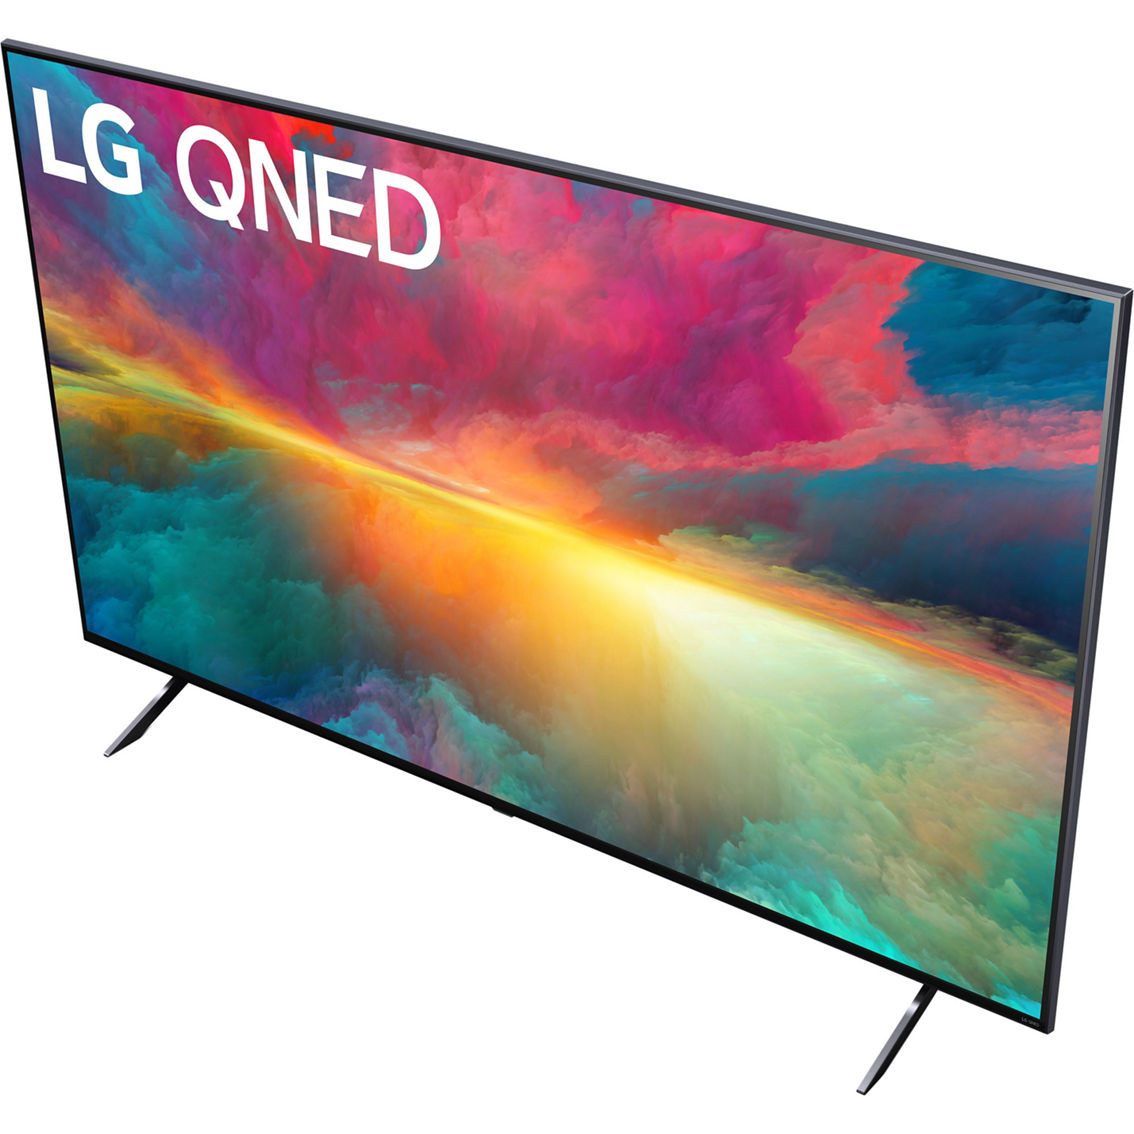 LG 65 in. QNED 4K HDR Smart TV with AI ThinQ 65QNED75URA - Image 5 of 10